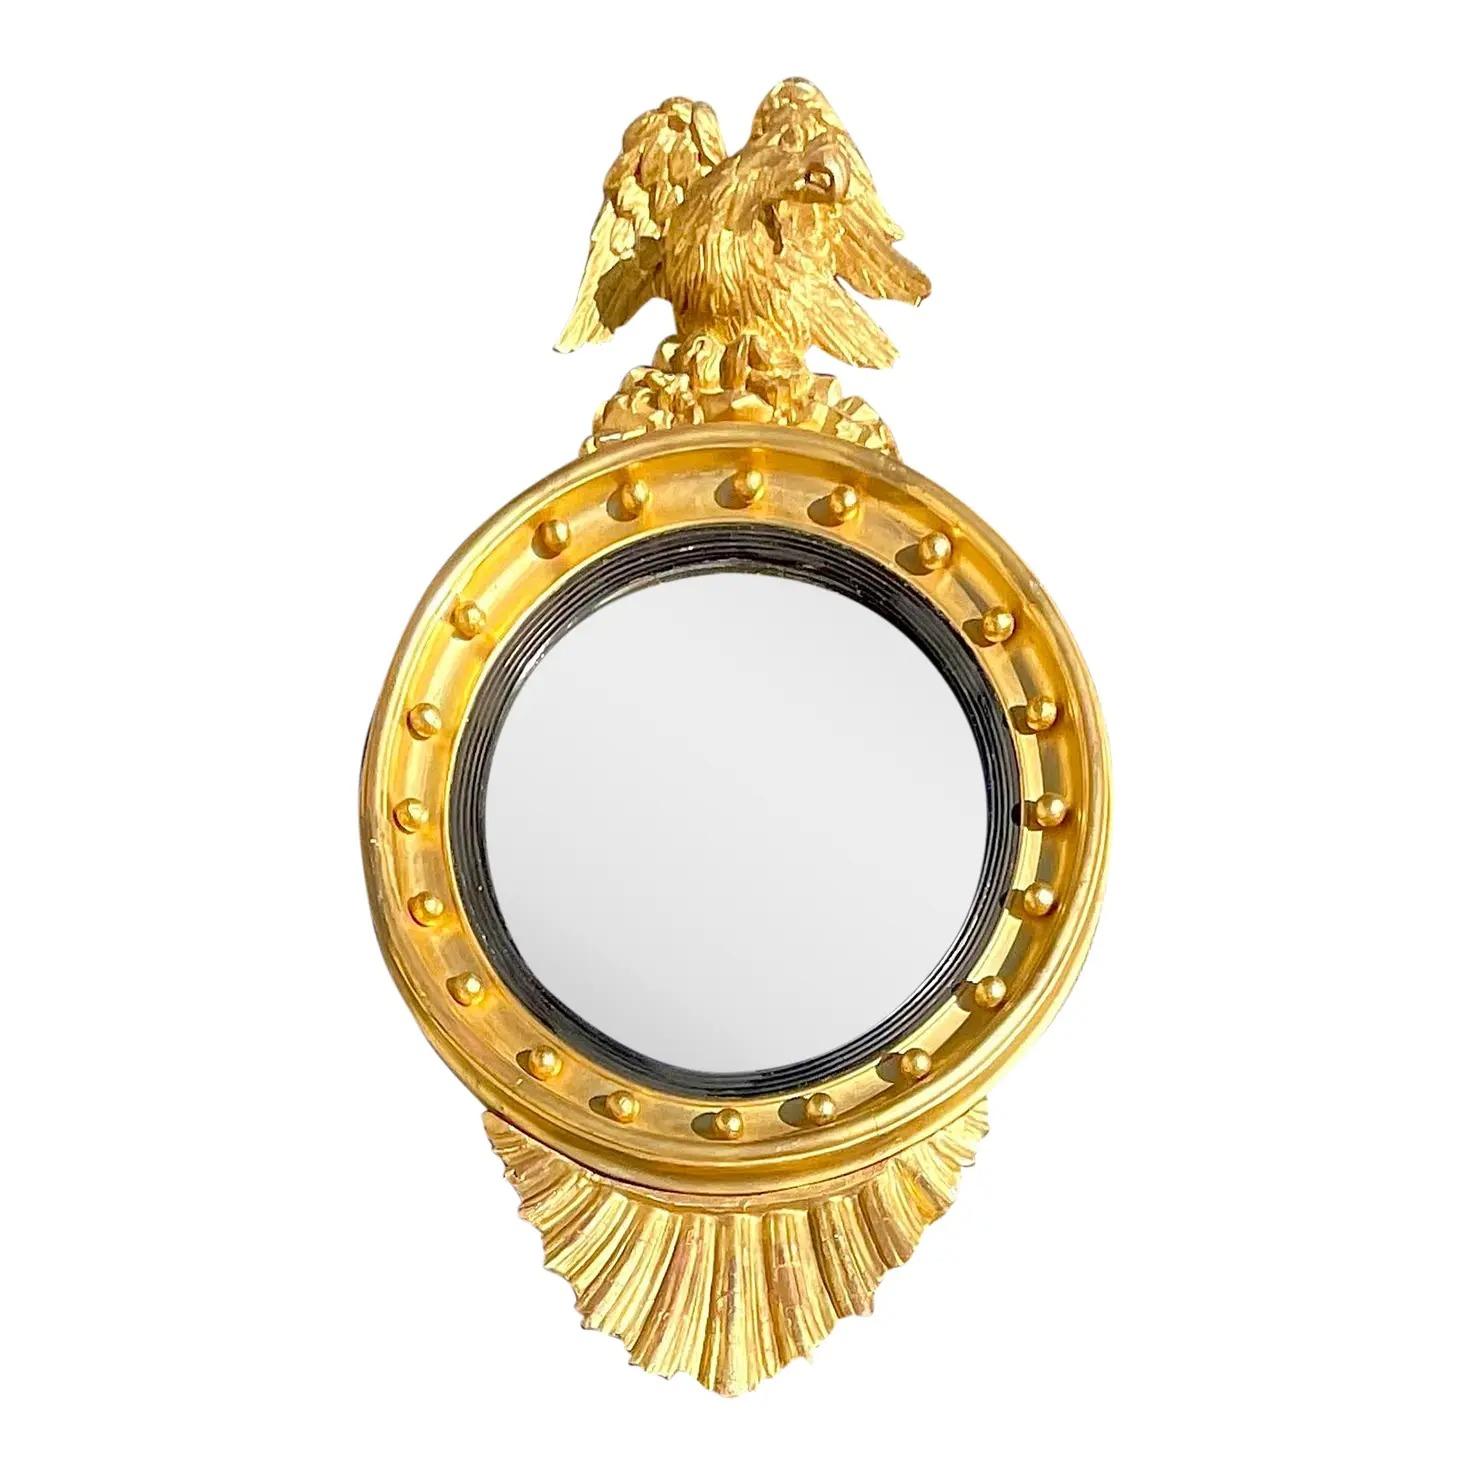 An incredible vintage Federal convex mirror. A beautiful gilt over gesso wood frame with iconic eagle detail. Additional shell detail on the bottom. Acquired from a Palm Beach estate.

The mirror is in good vintage condition. Scuffs and blemishes